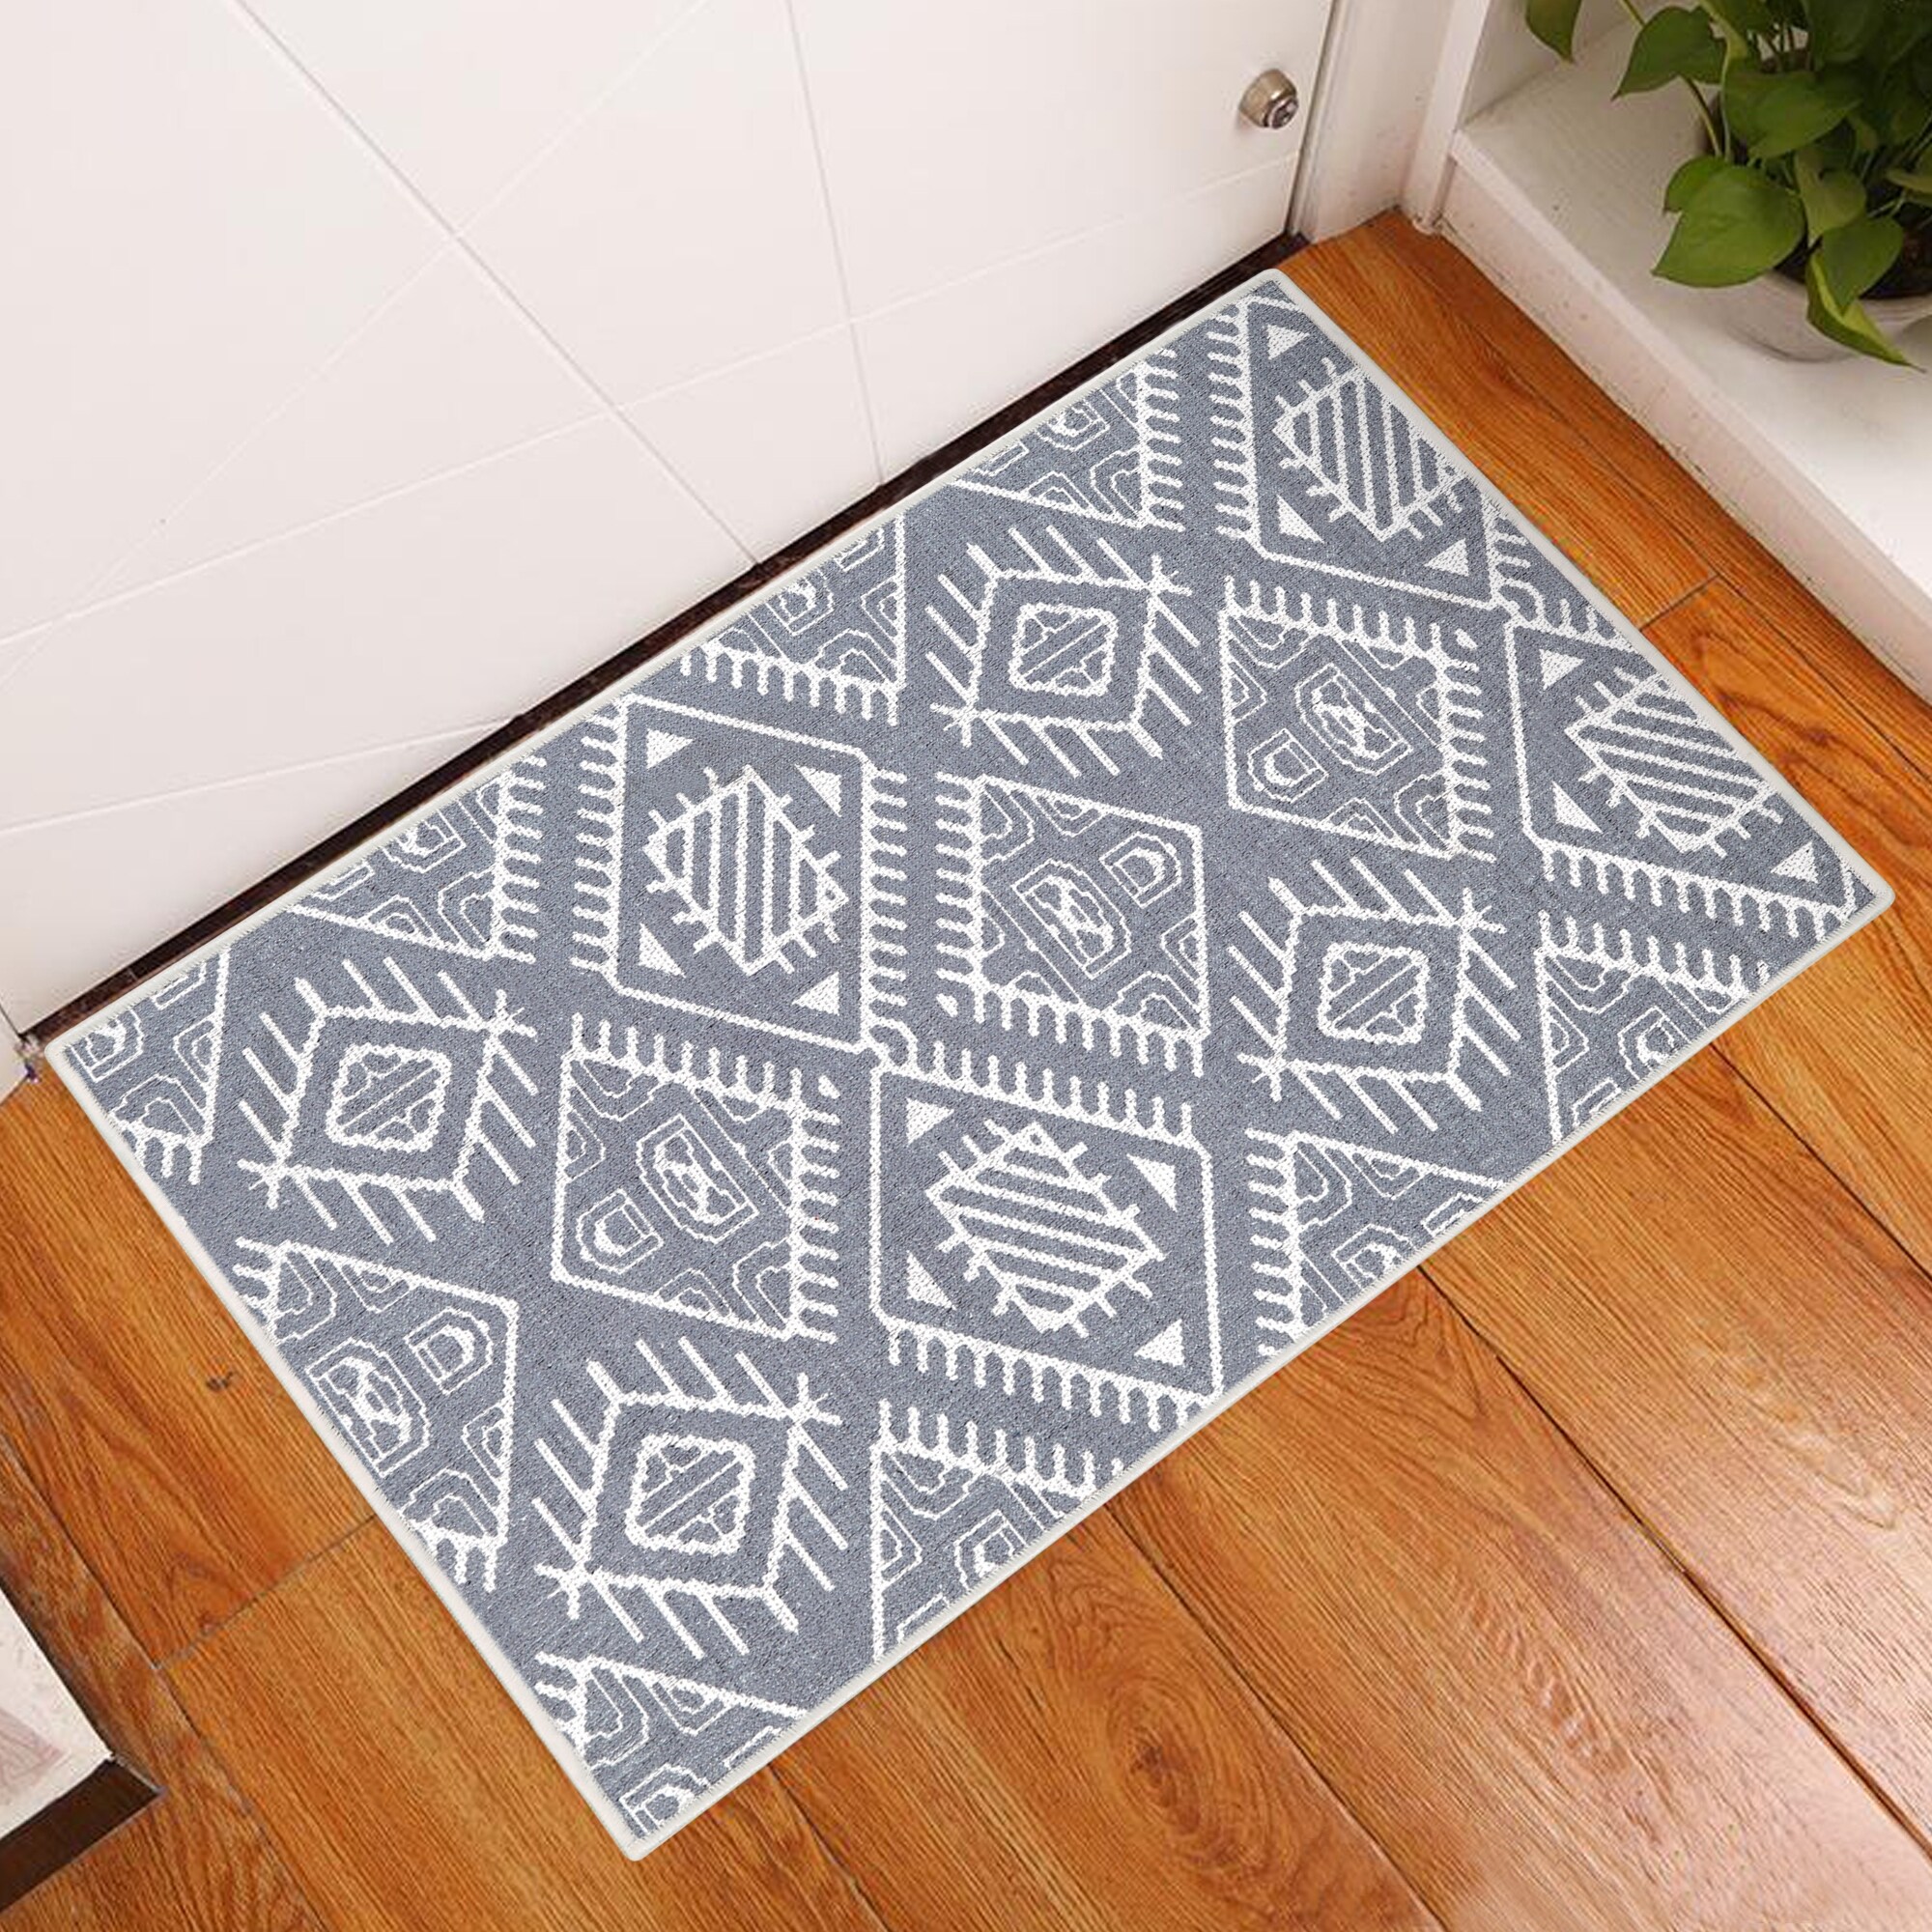 https://ak1.ostkcdn.com/images/products/is/images/direct/6a0c447d00af82f618d5191efab1053efe8a9738/Monument-Collection-2-x-3-Foot-Rug-Runner-Thin-Non-Slip-Area-Rug---Cotton-Indoor-Rug-for-Front-Door-Foyer-Rug-for-Entryway.jpg